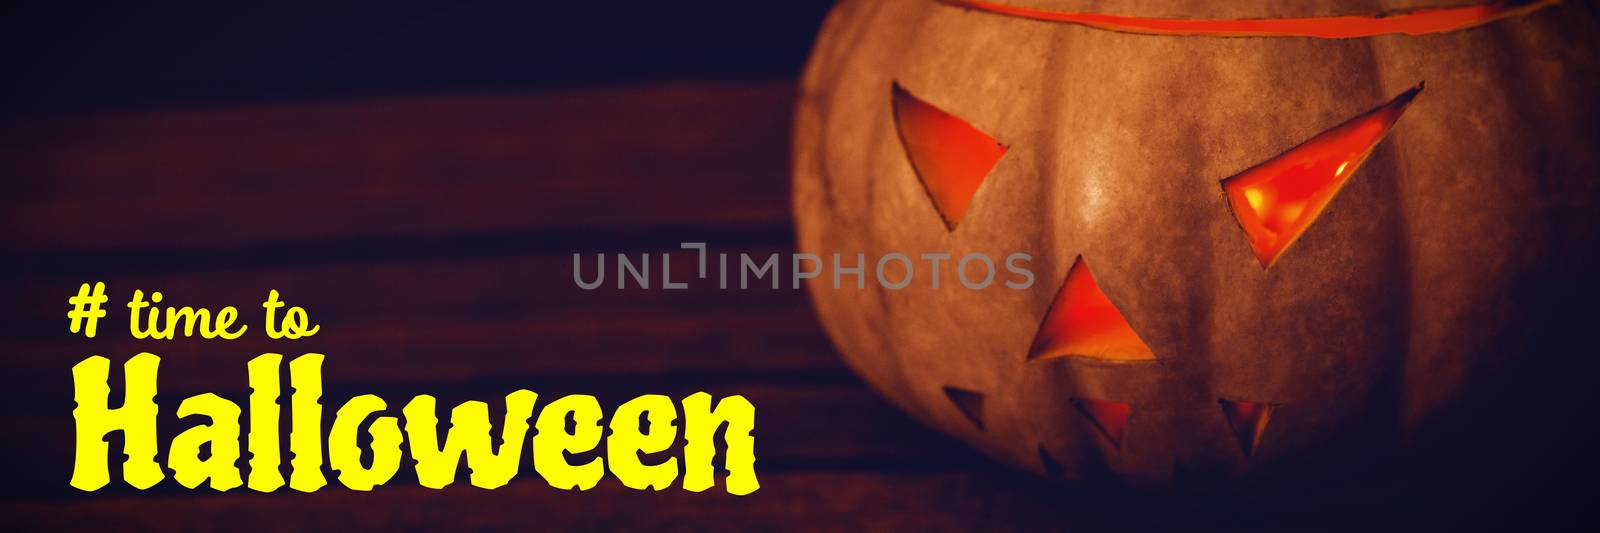 Digital image of time to Halloween text against close up of illuminated jack o lantern on table during halloween